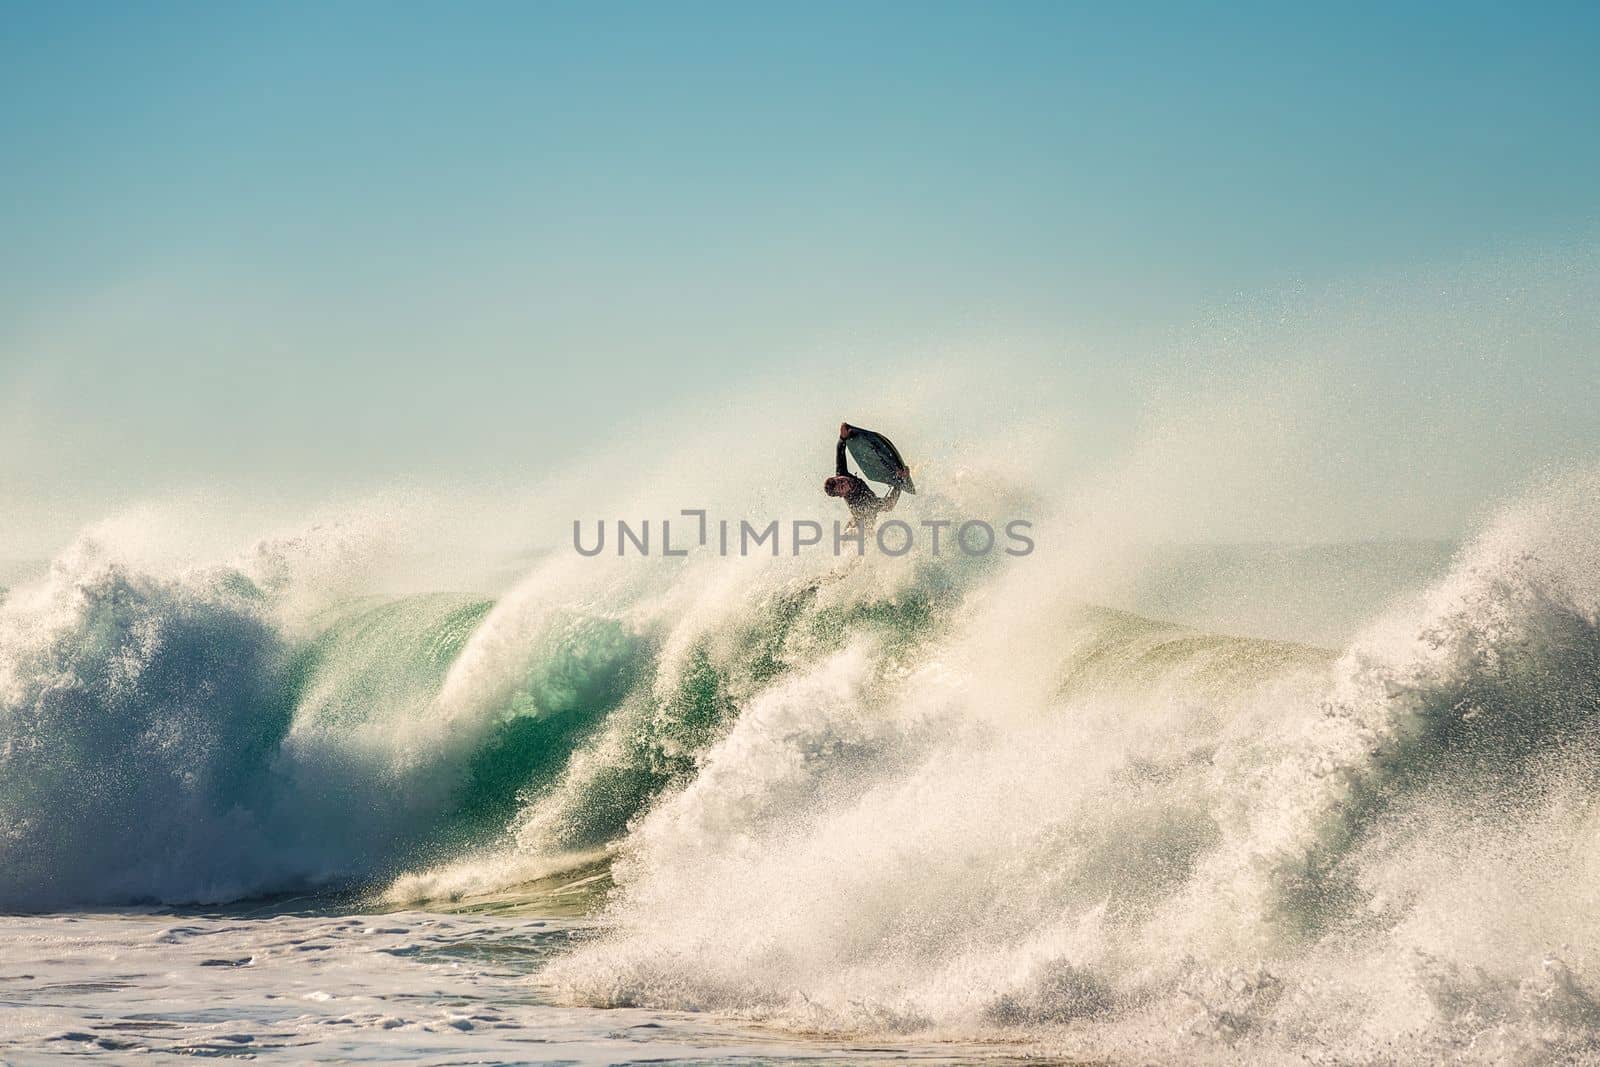 Surfer jumps a powerful and big wave at sunset by raulmelldo